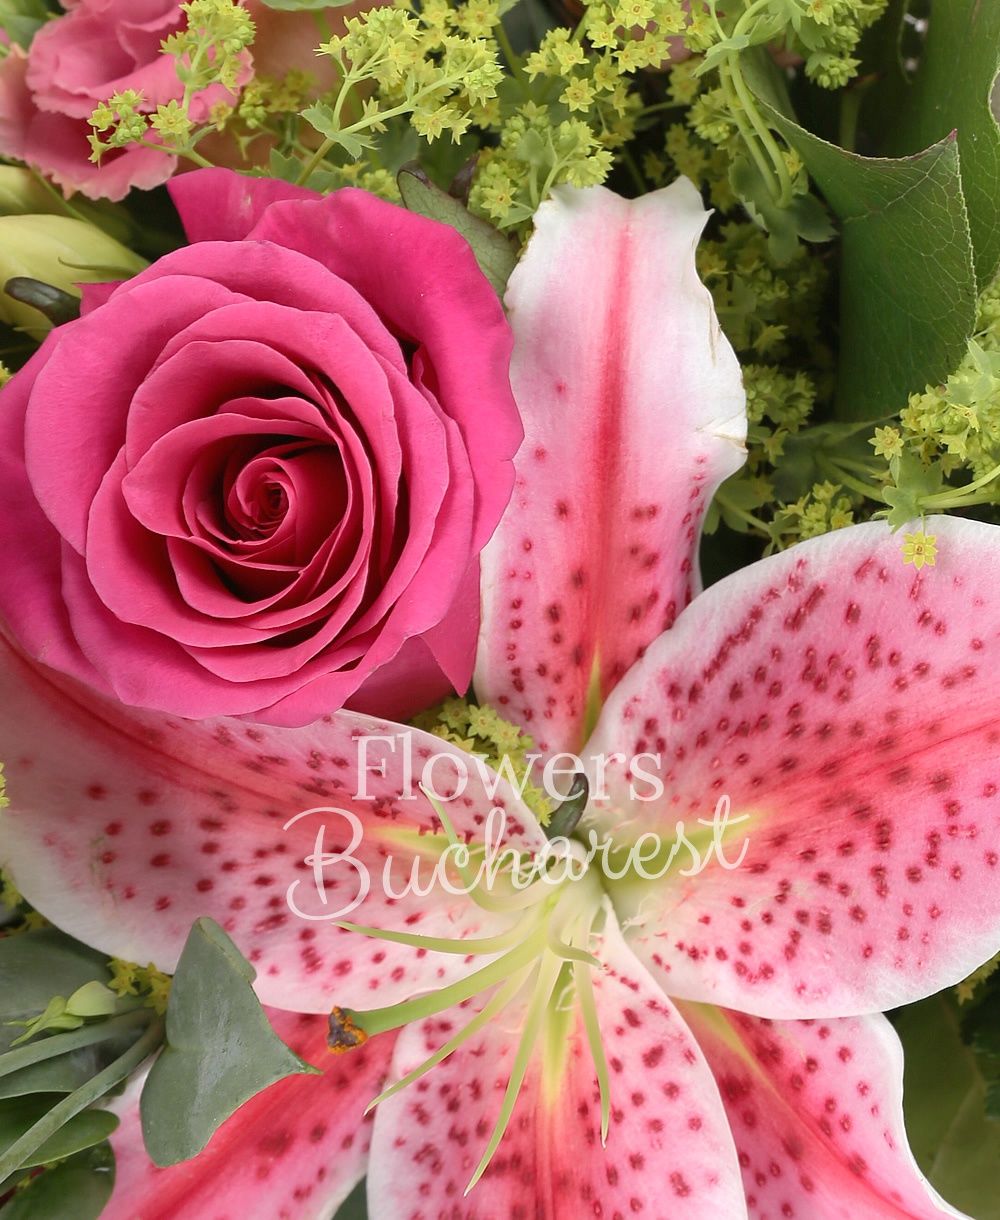 3 pink roses, 3 pink lisianthus, 1 lily, greenery